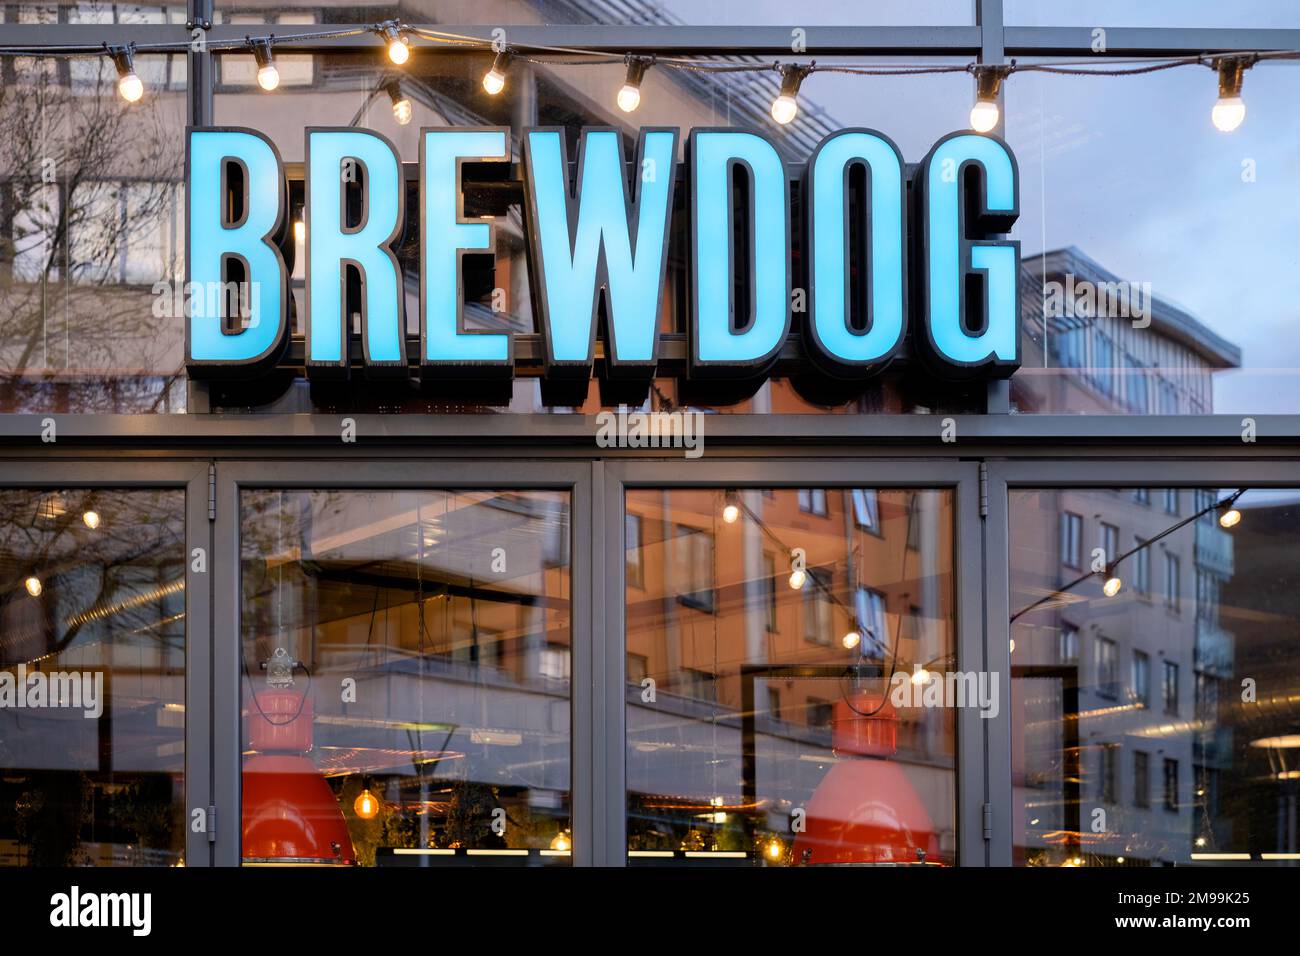 A large Brewdog pub situated on the harbourside at Bristol, UK. The illuminated Brewdog logo is clearly shown on a large sign at the front of the pub Stock Photo